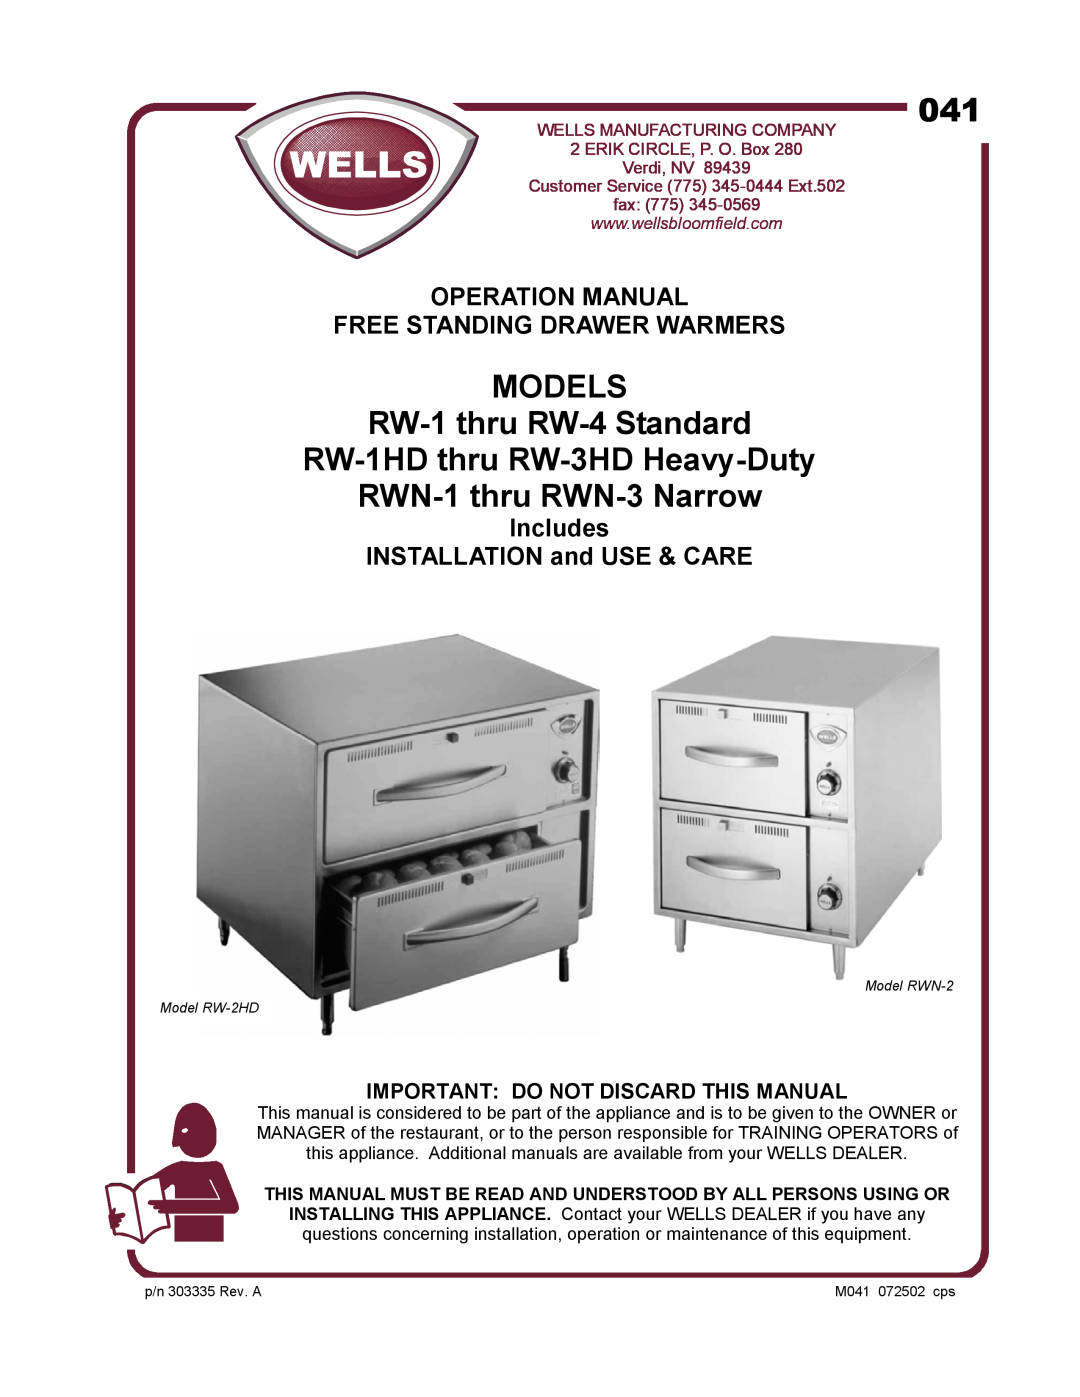 Wells RW-1 thru RW-4 Standard operation manual Includes INSTALLATION and USE & CARE, Important Do Not Discard This Manual 